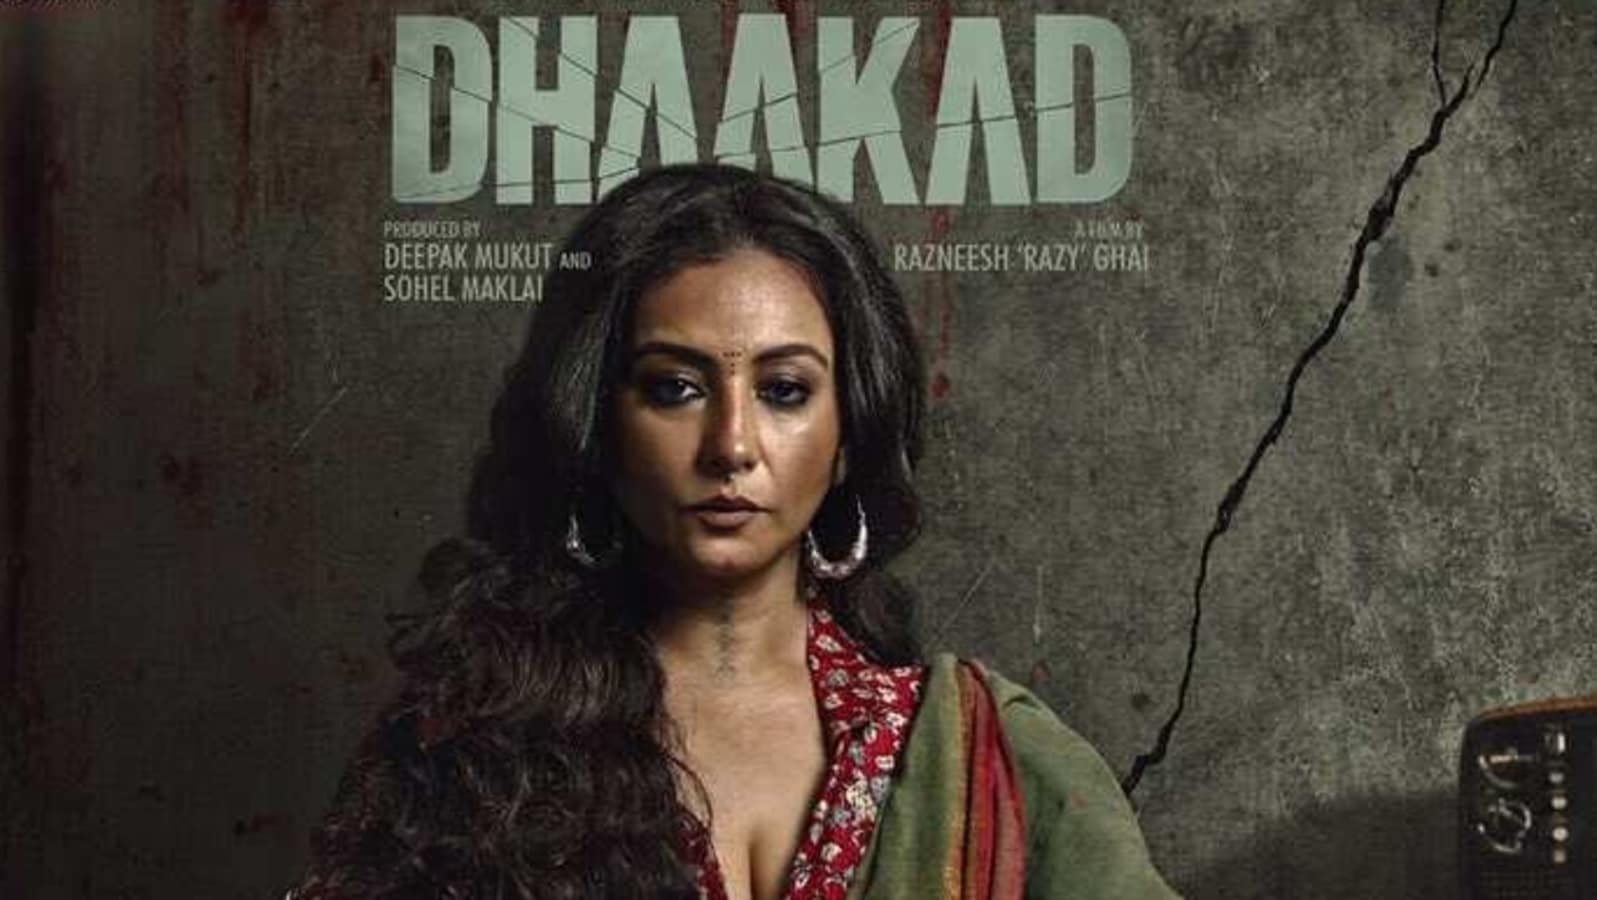 Dhaakad-Poster movie free download online-1080